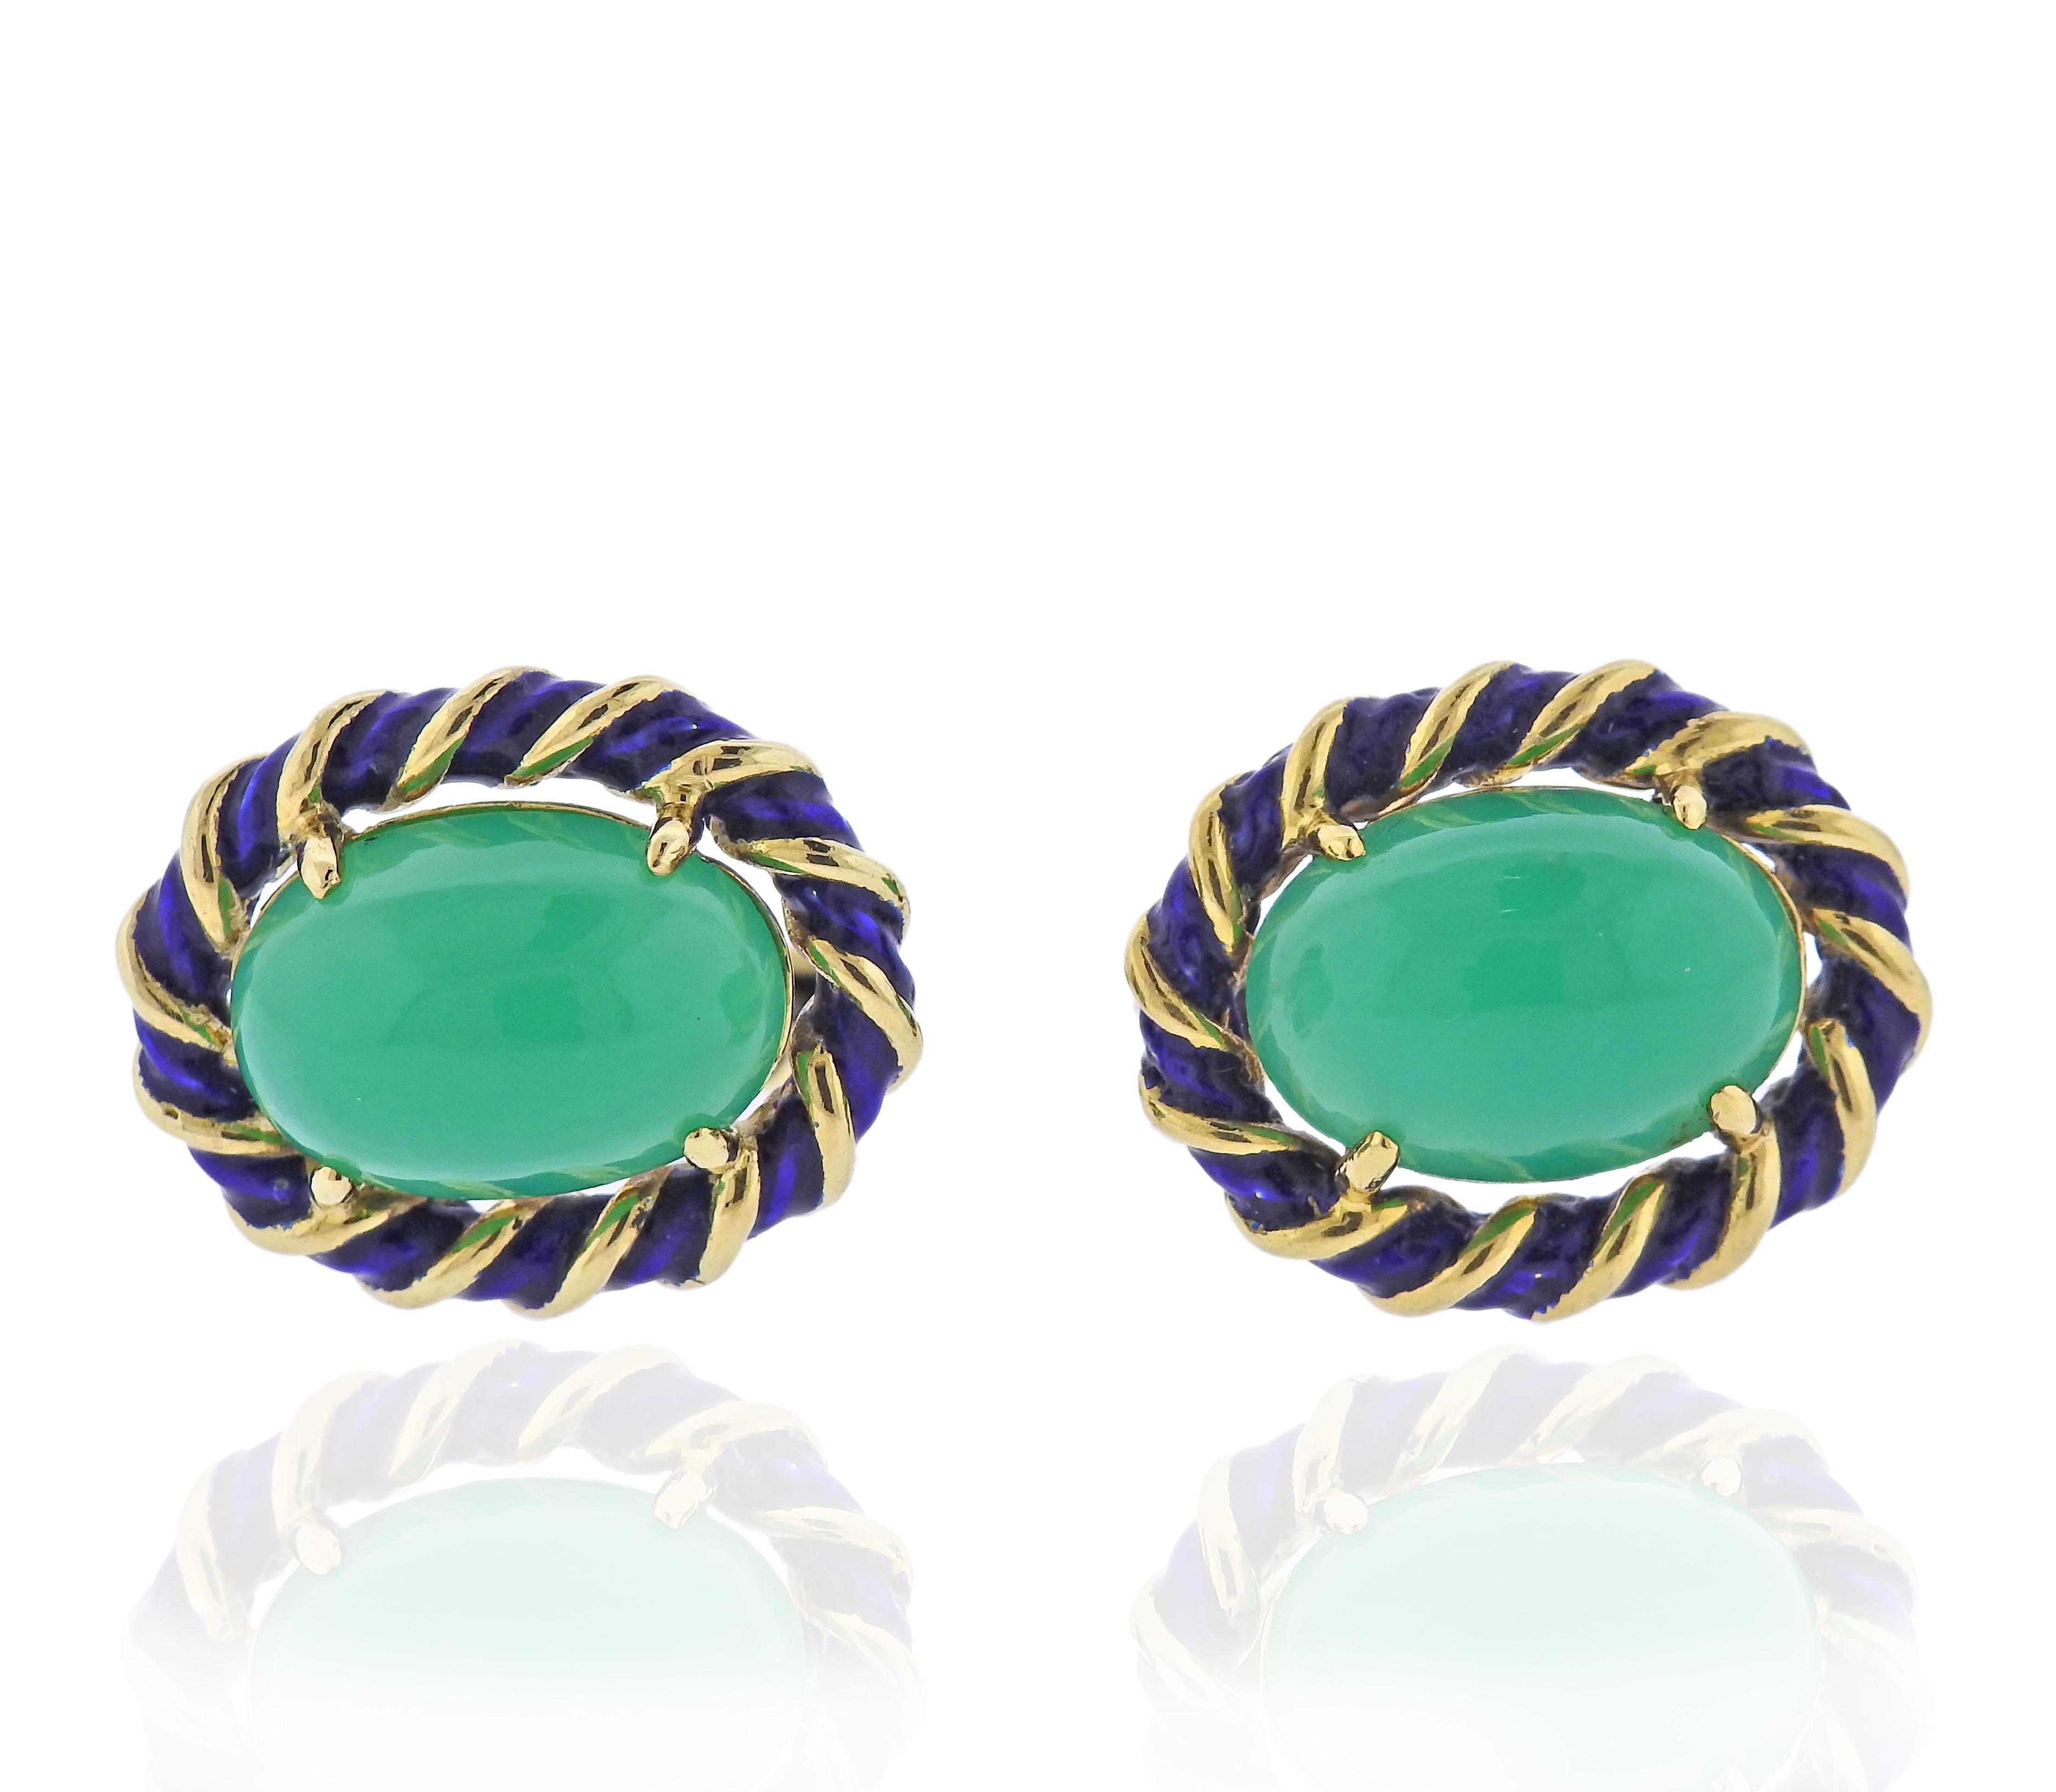 Pair of 18k gold cufflinks, decorated with 15.3x 10.8mm chrysoprase cabochons and blue enamel.  Each top is 22 x 18mm, weigh 24.5 grams.